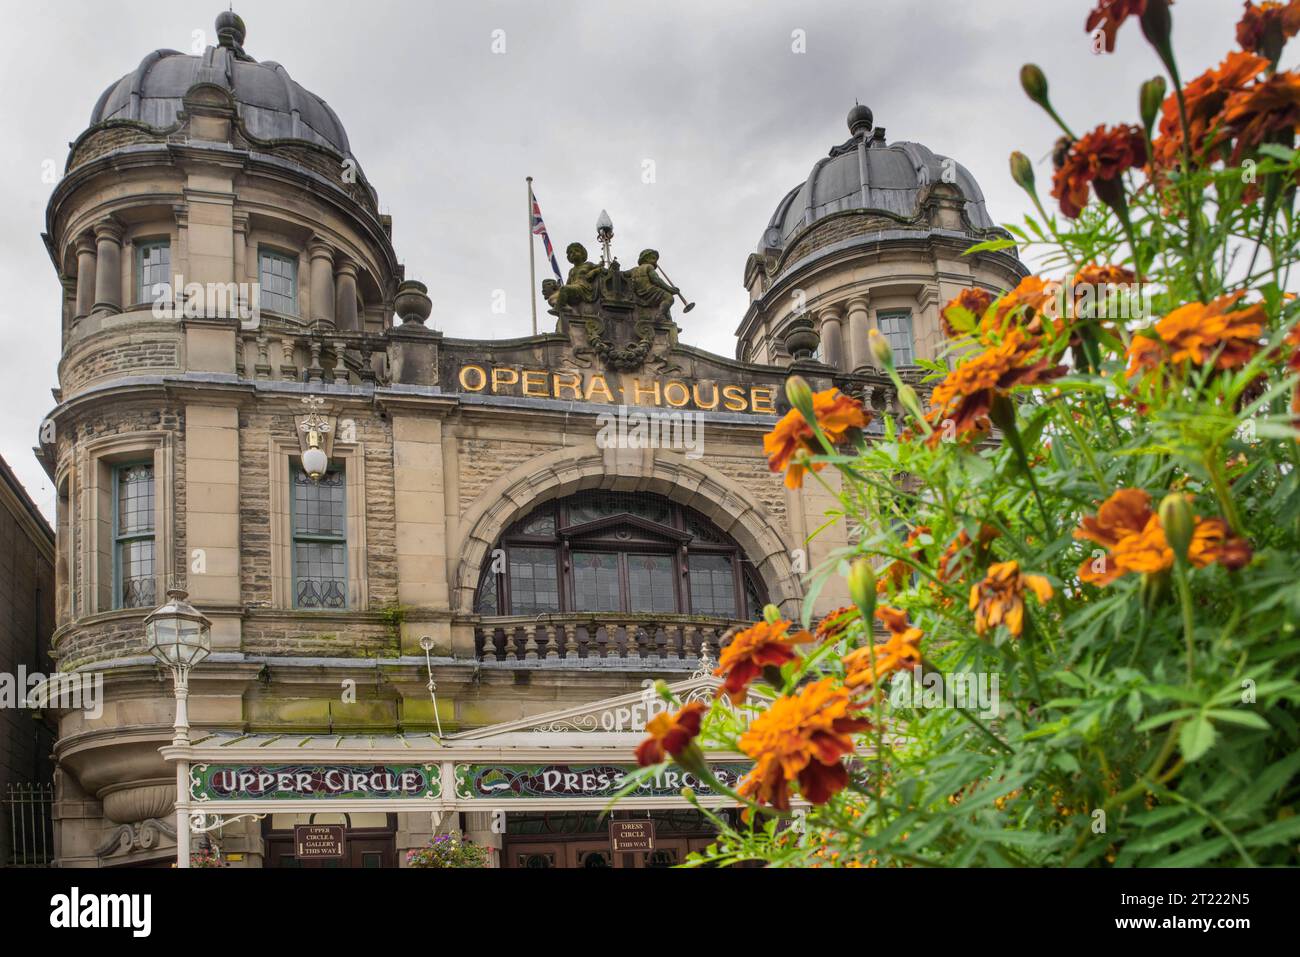 Buxton Opera House in the spa town of Buxton, Derbyshire, England, with orange French marigolds in the foreground. Stock Photo